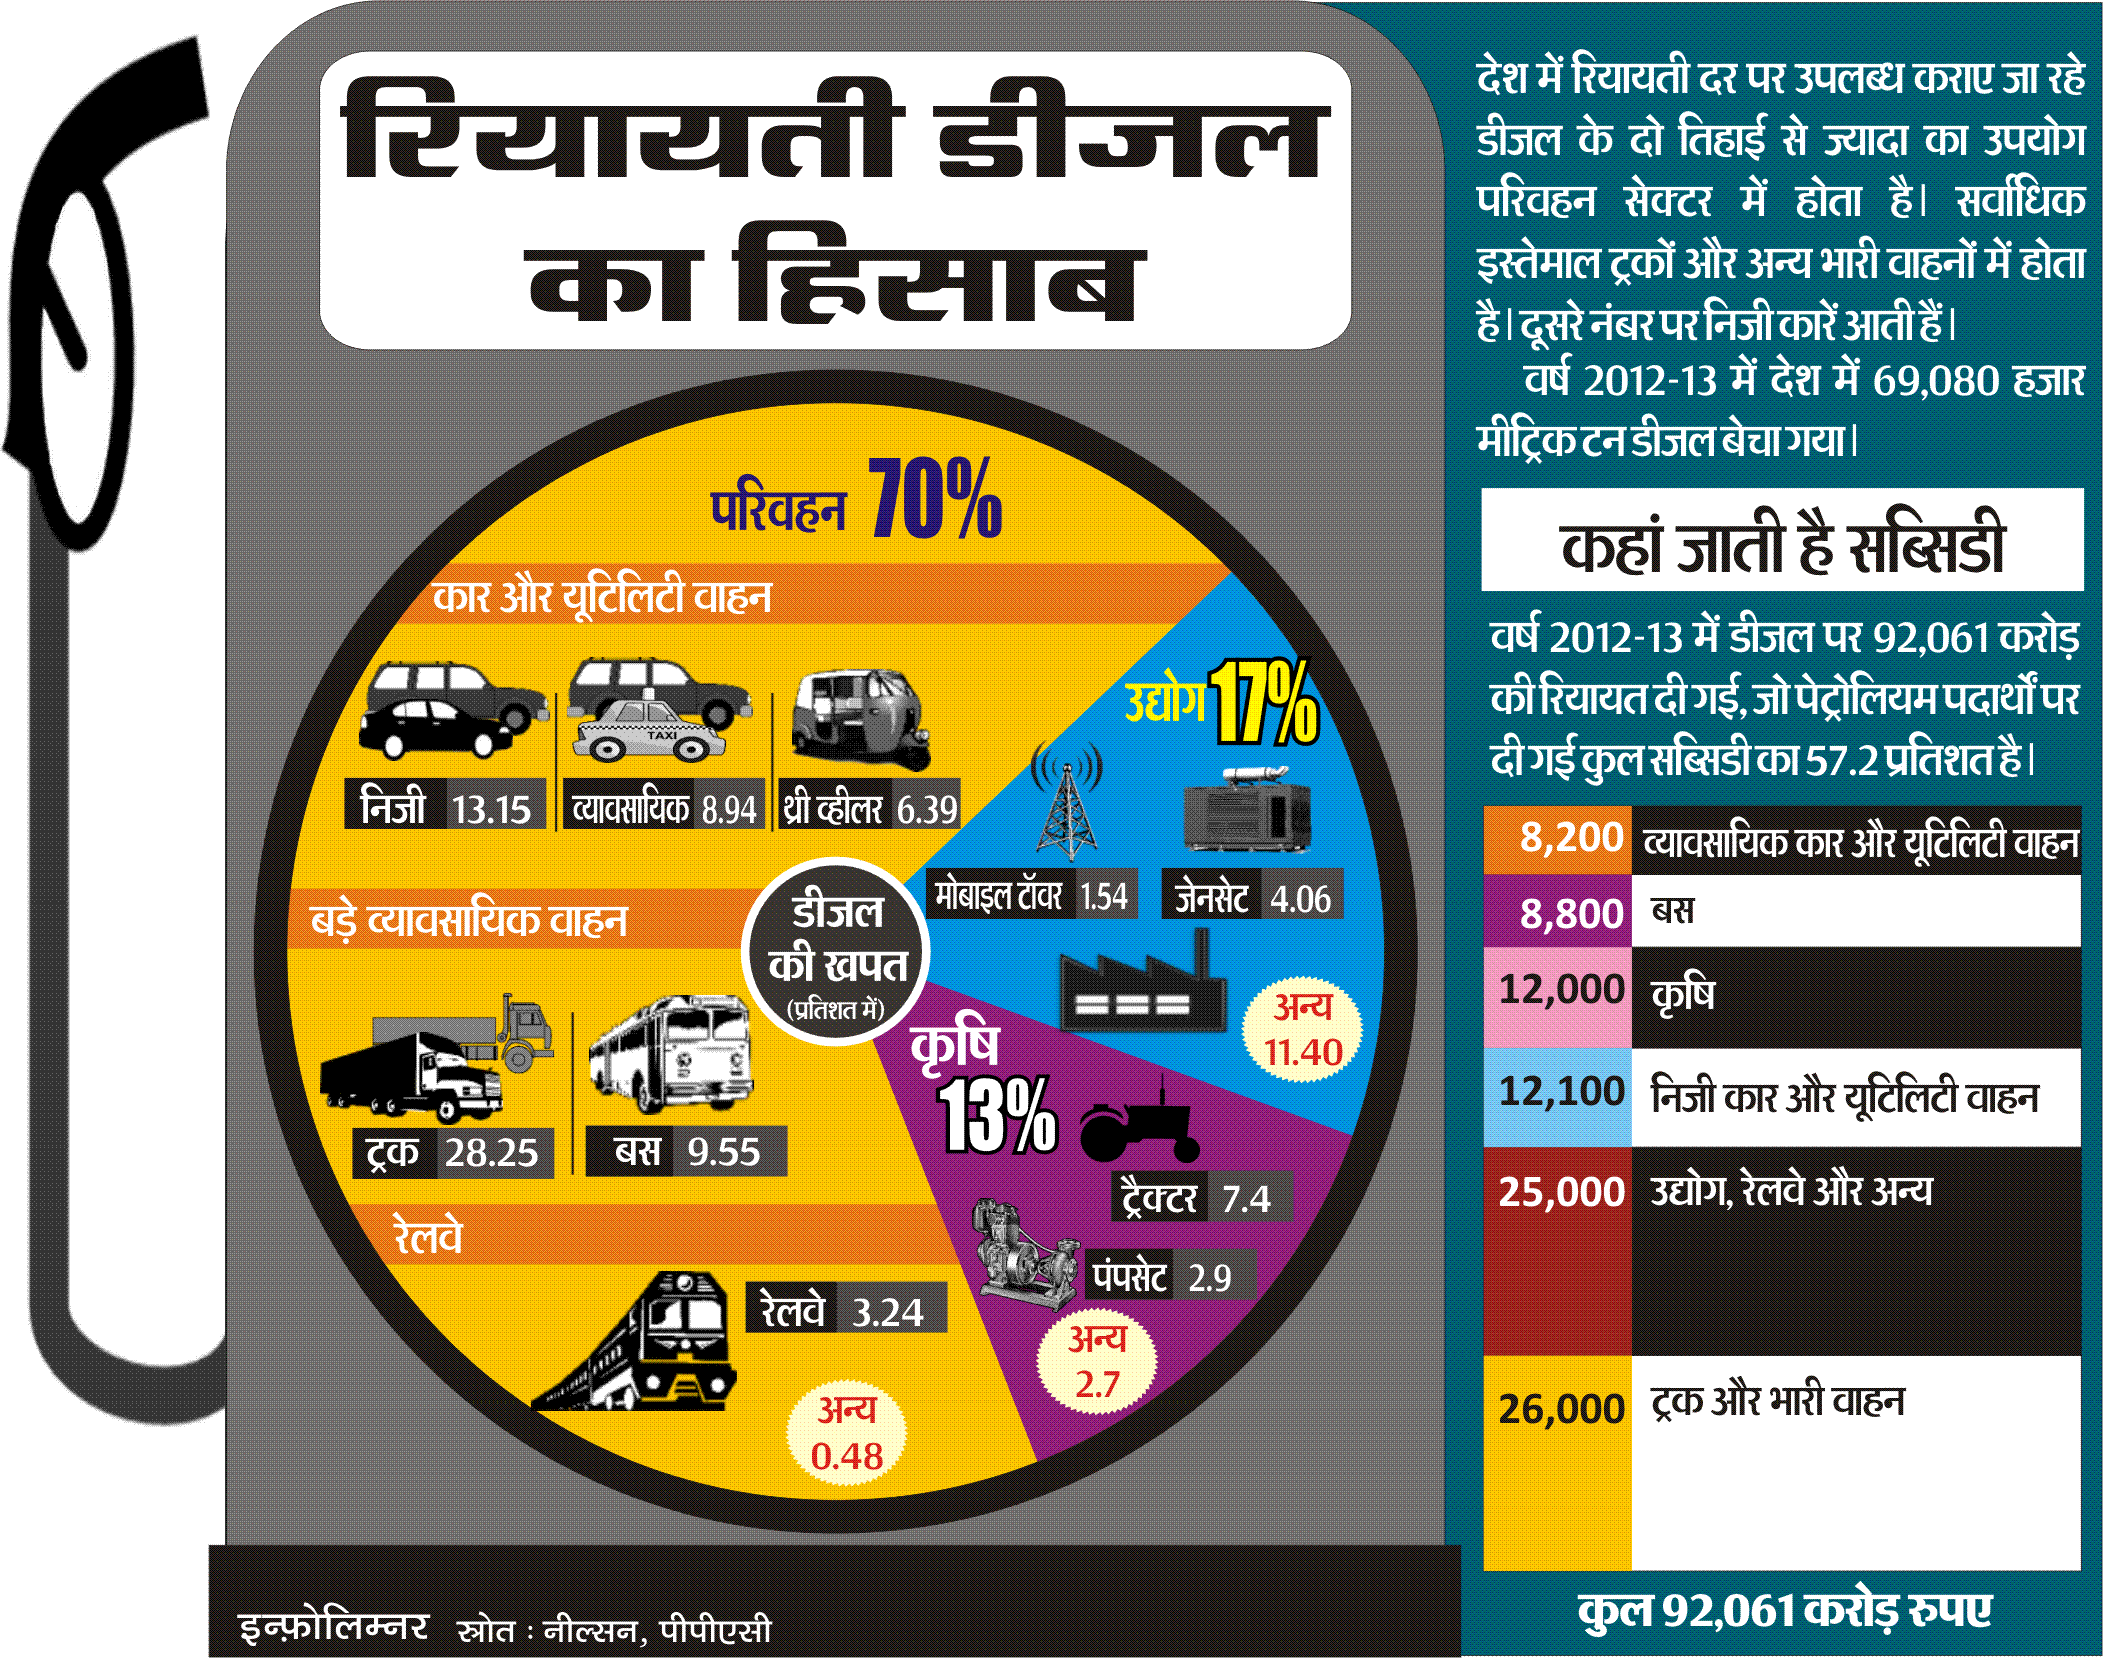 India's Diesel Subsidy Infographic